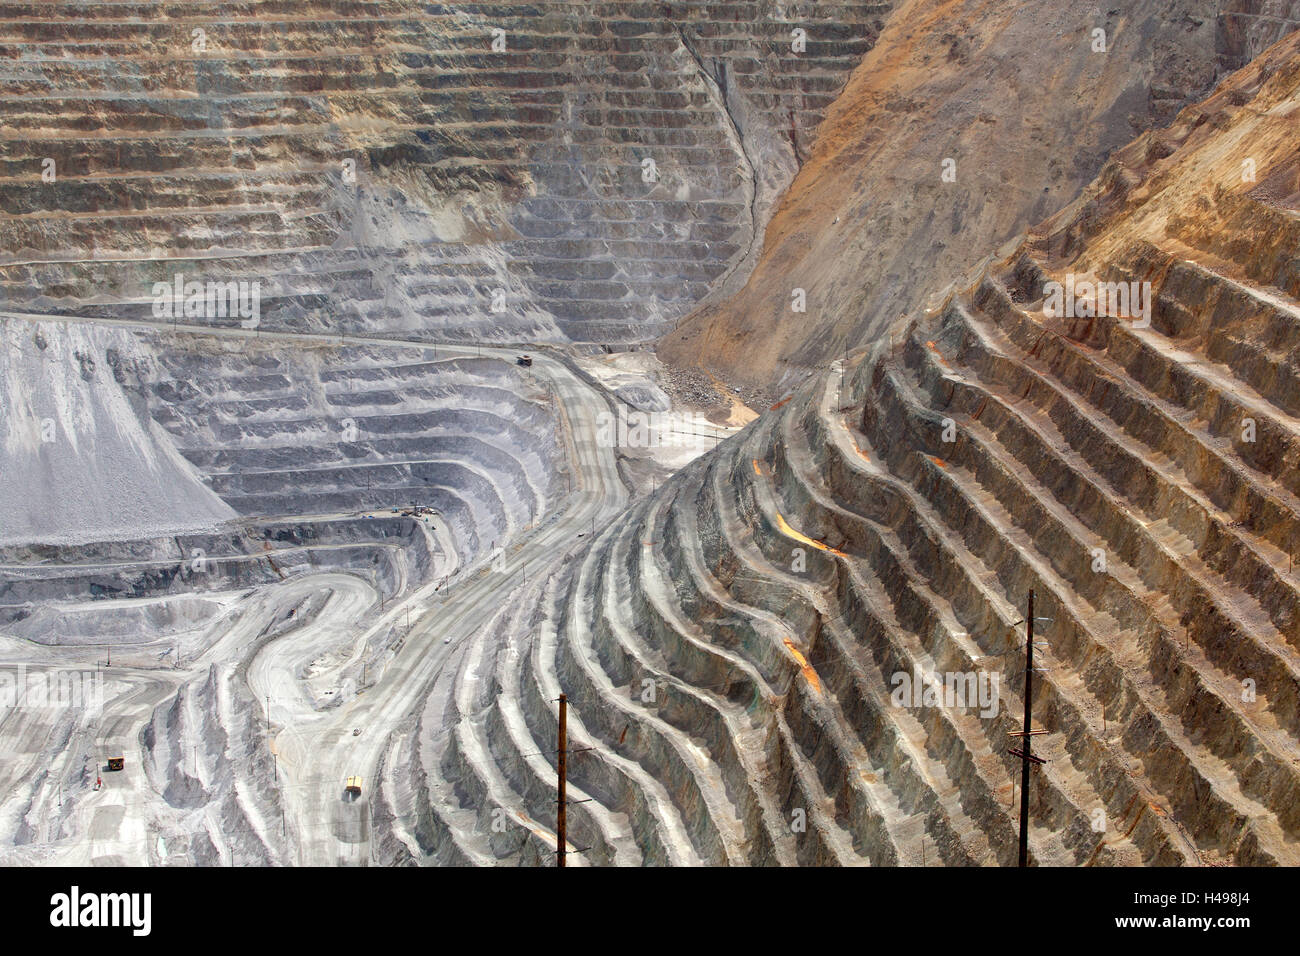 USA, Bingham Canyon Mine, the biggest copper mine of the world, Stock Photo